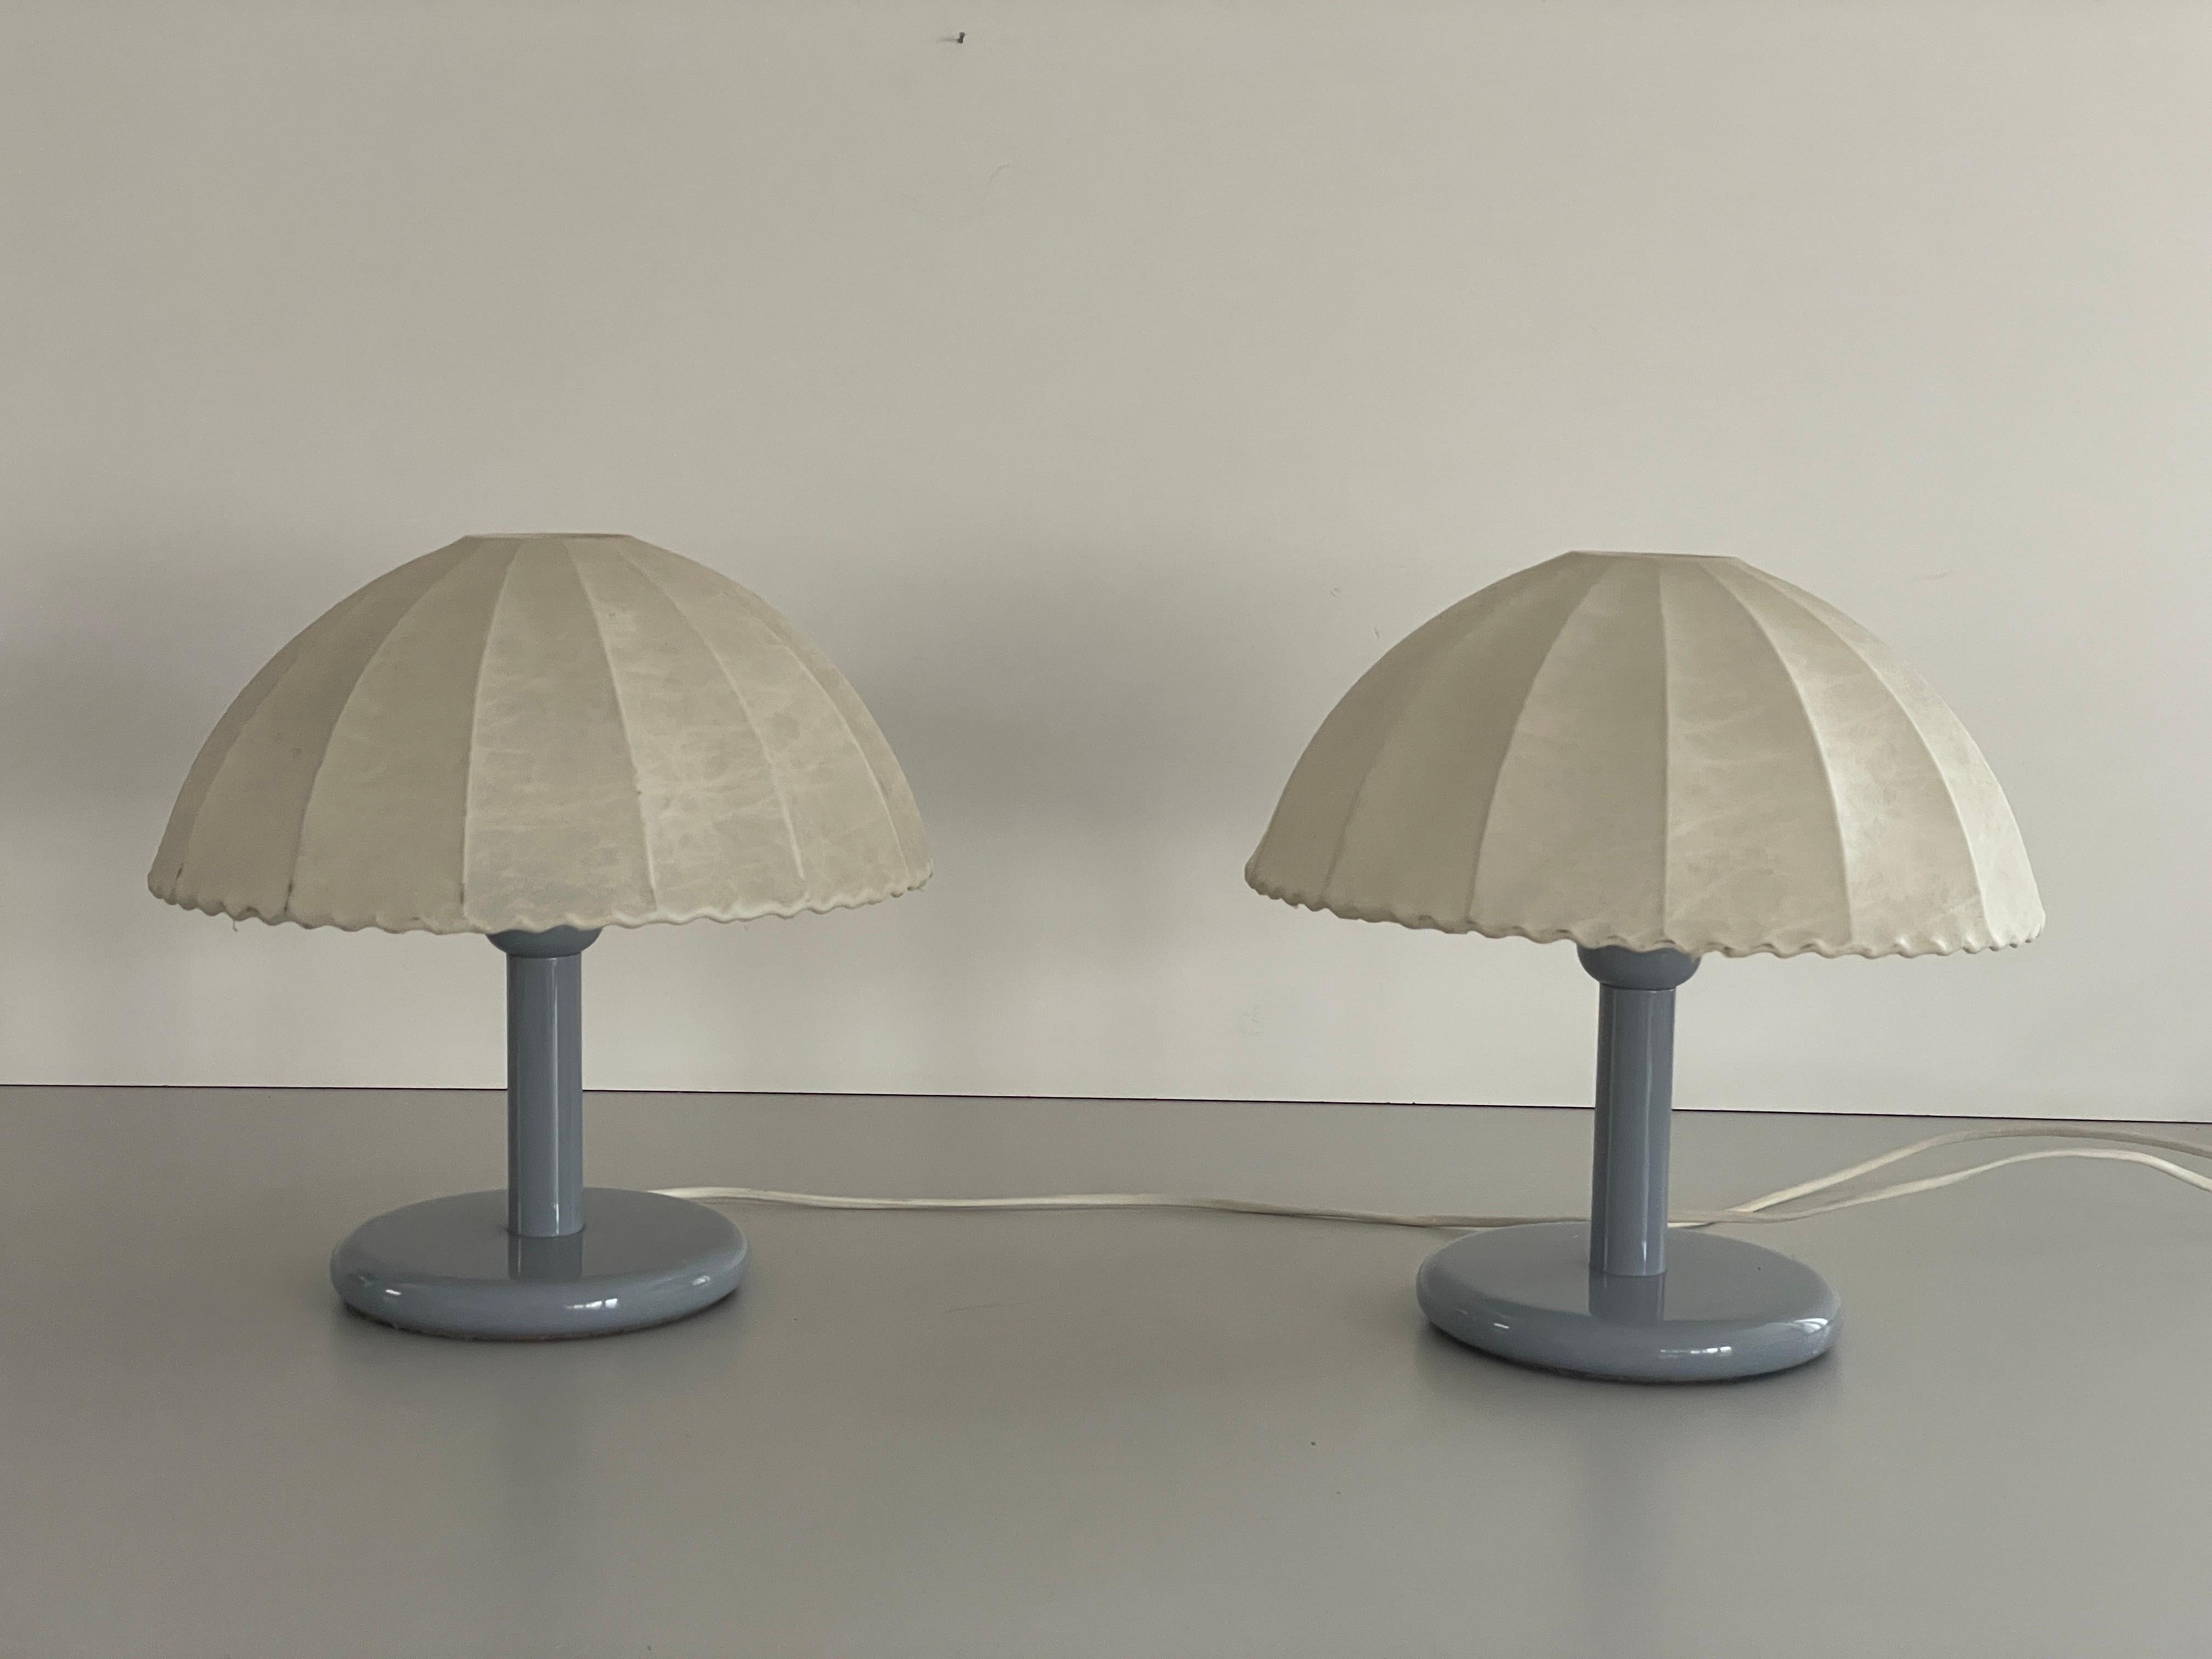 Pair of Cocoon Table Lamps with Grey Metal Base by GOLDKANT, 1960s, Germany
 
Cocoon shades & metal body

Minimal and natural design
Very high quality.
Fully functional.
Original cable and plug. These lamps are suitable for EU plug socket. Other